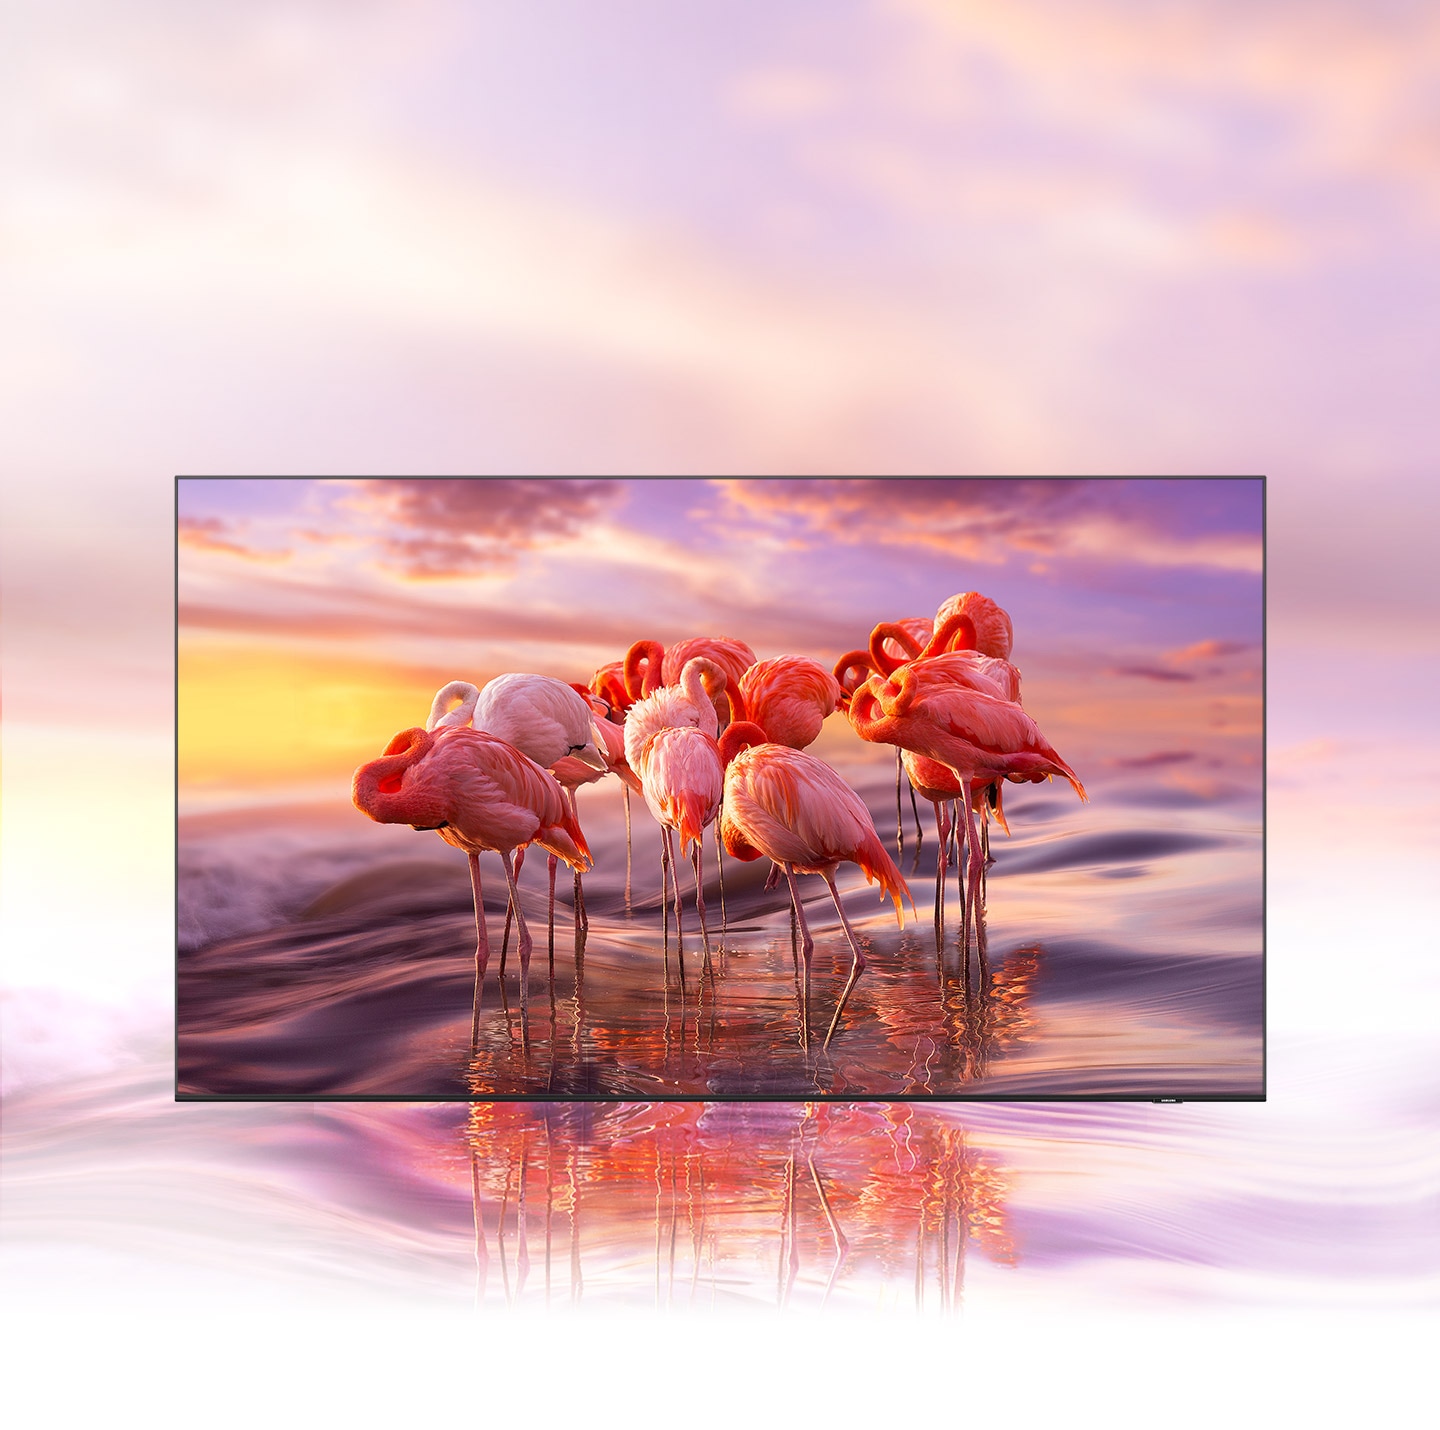 The QLED TV displays an image of flamingos in complex colors to demonstrate the brilliance of the color shades of Quantum Dot technology.